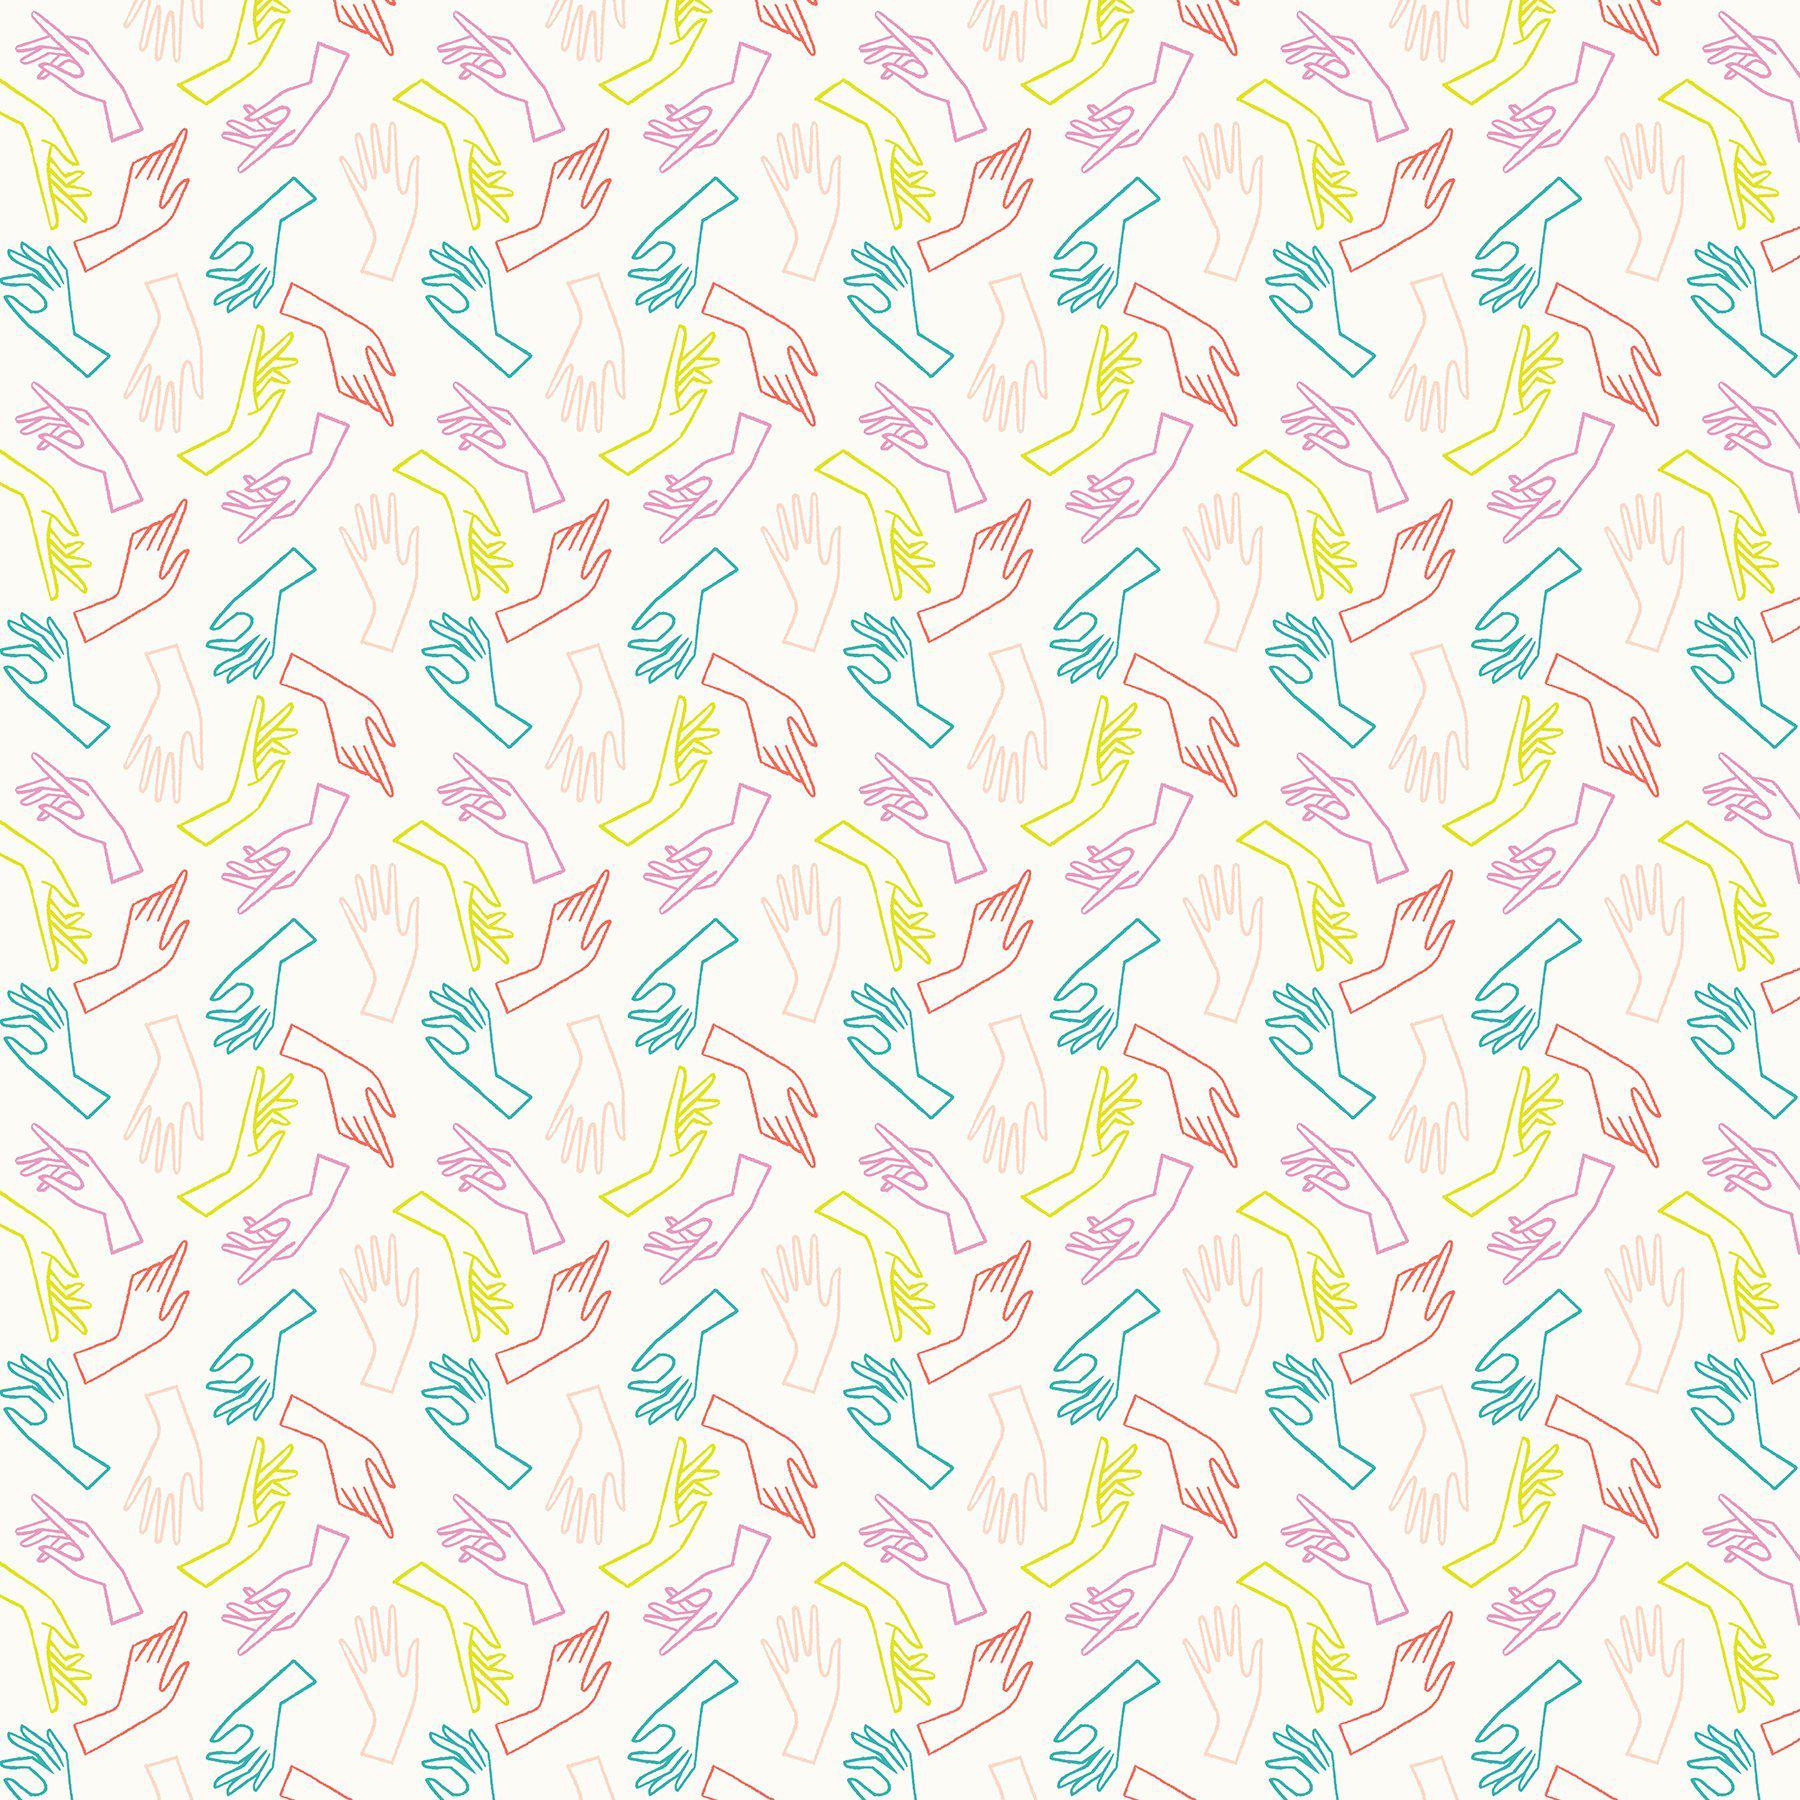 Ruby Star Society-Gestures Cream Soda-fabric-gather here online